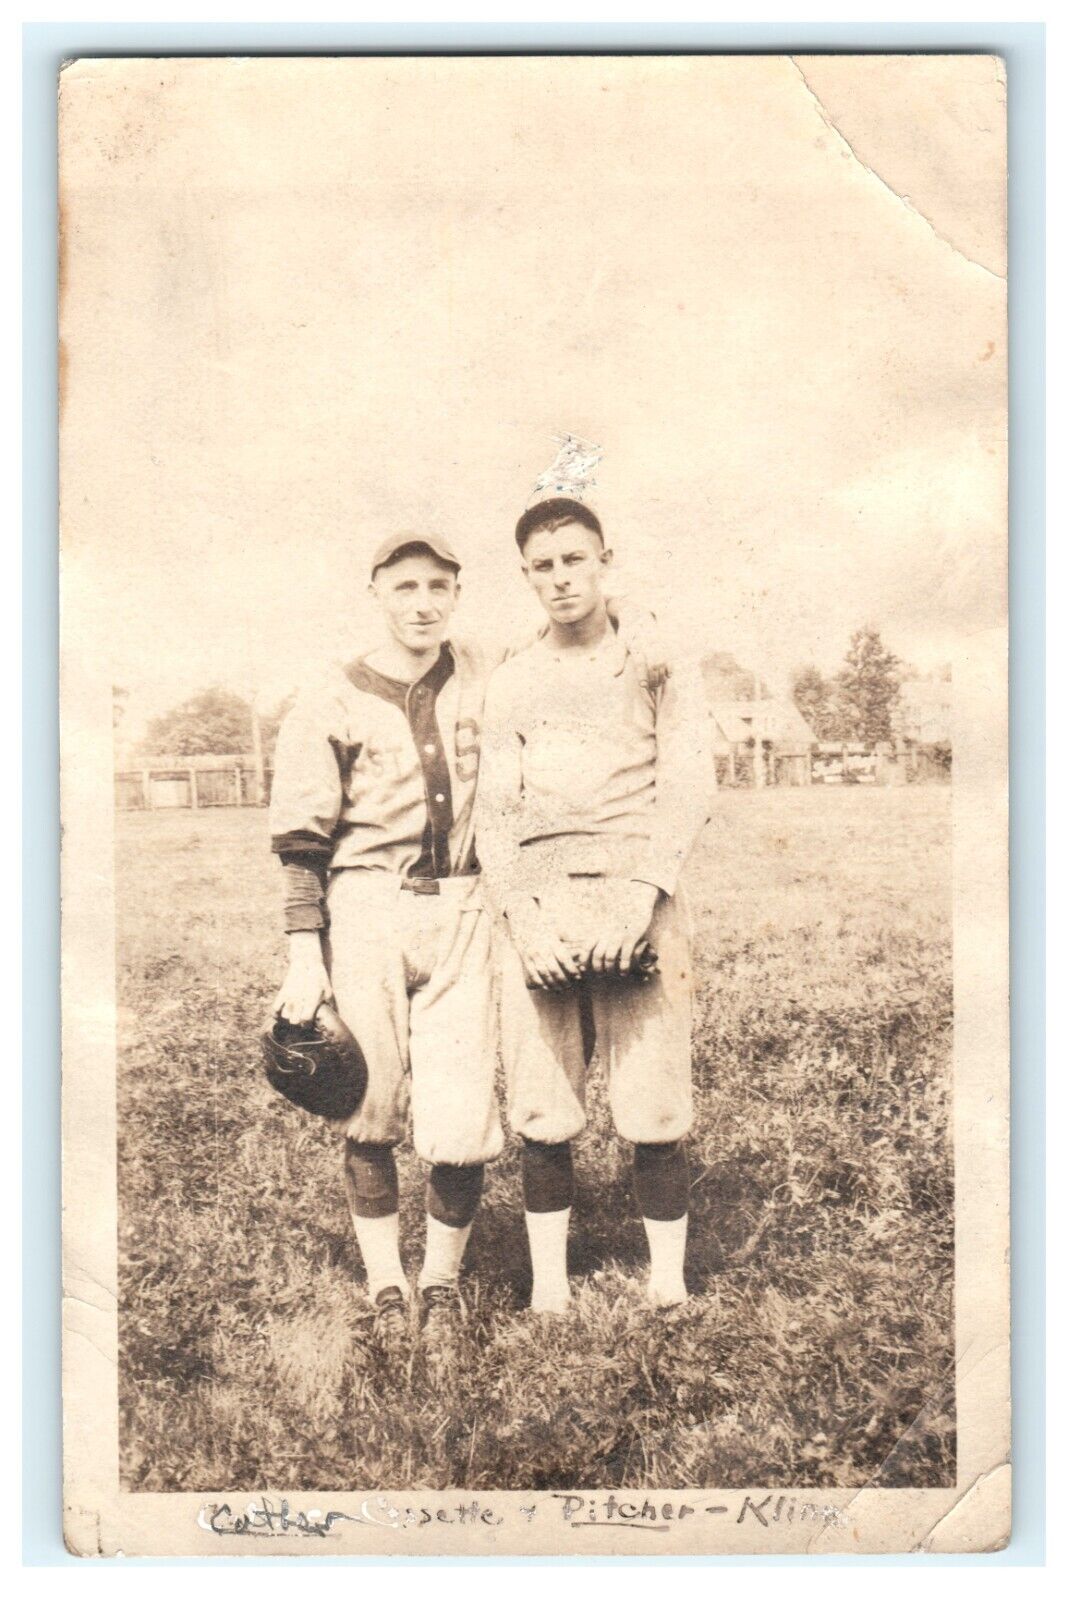 Meriden CT Connecticut Catcher and Pitchers Real Photo Baseball Sport Card